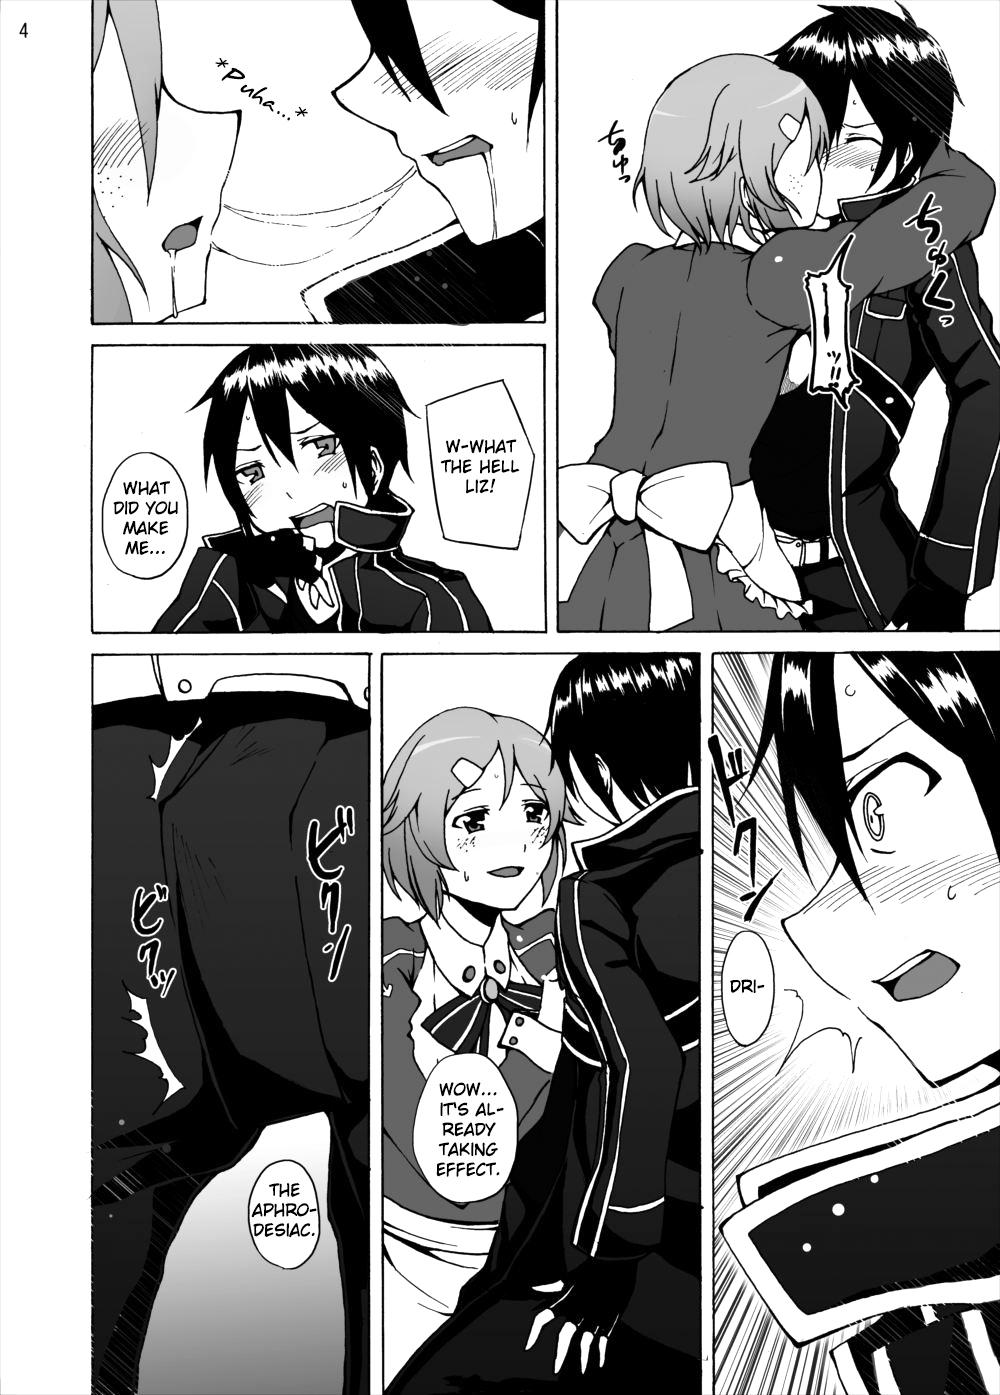 Ass Lisbeth's Decision...To Steal Kirito From Asuna Even if She Has to Use a Dangerous Drug - Sword art online POV - Page 4